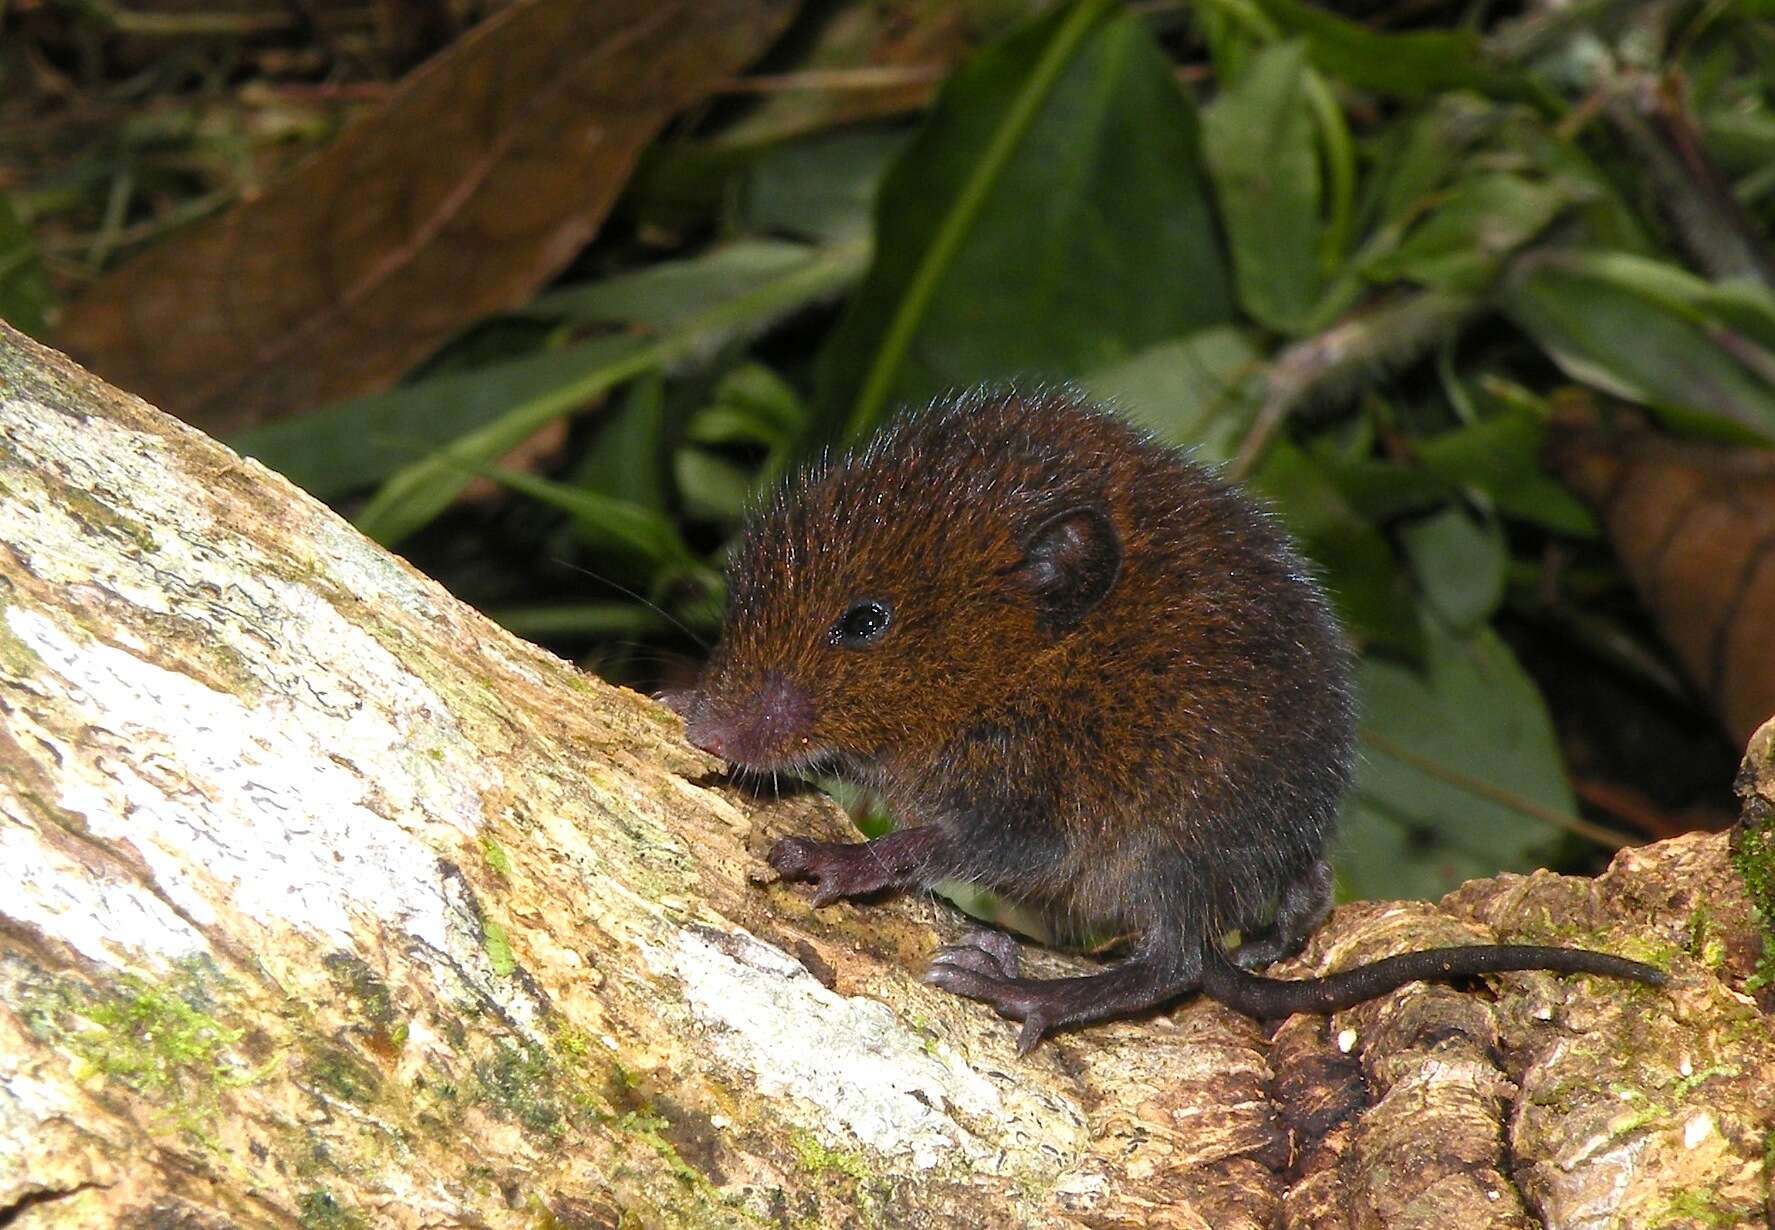 Image of brown mouse